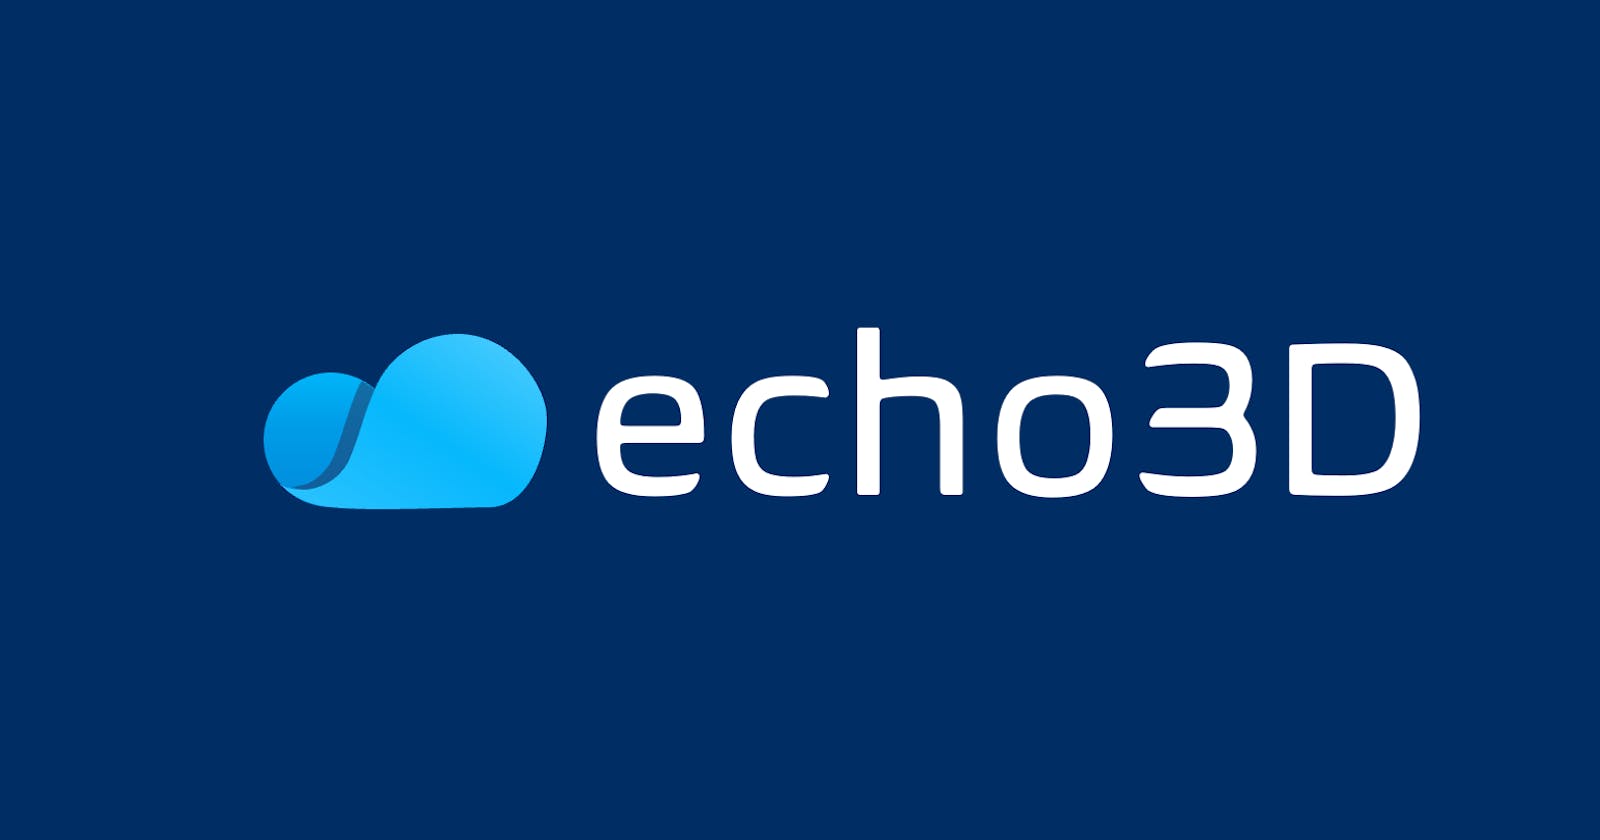 echo3D introduces support for Niantic Lightship to help Metaverse developers build highly-dynamic AR experiences